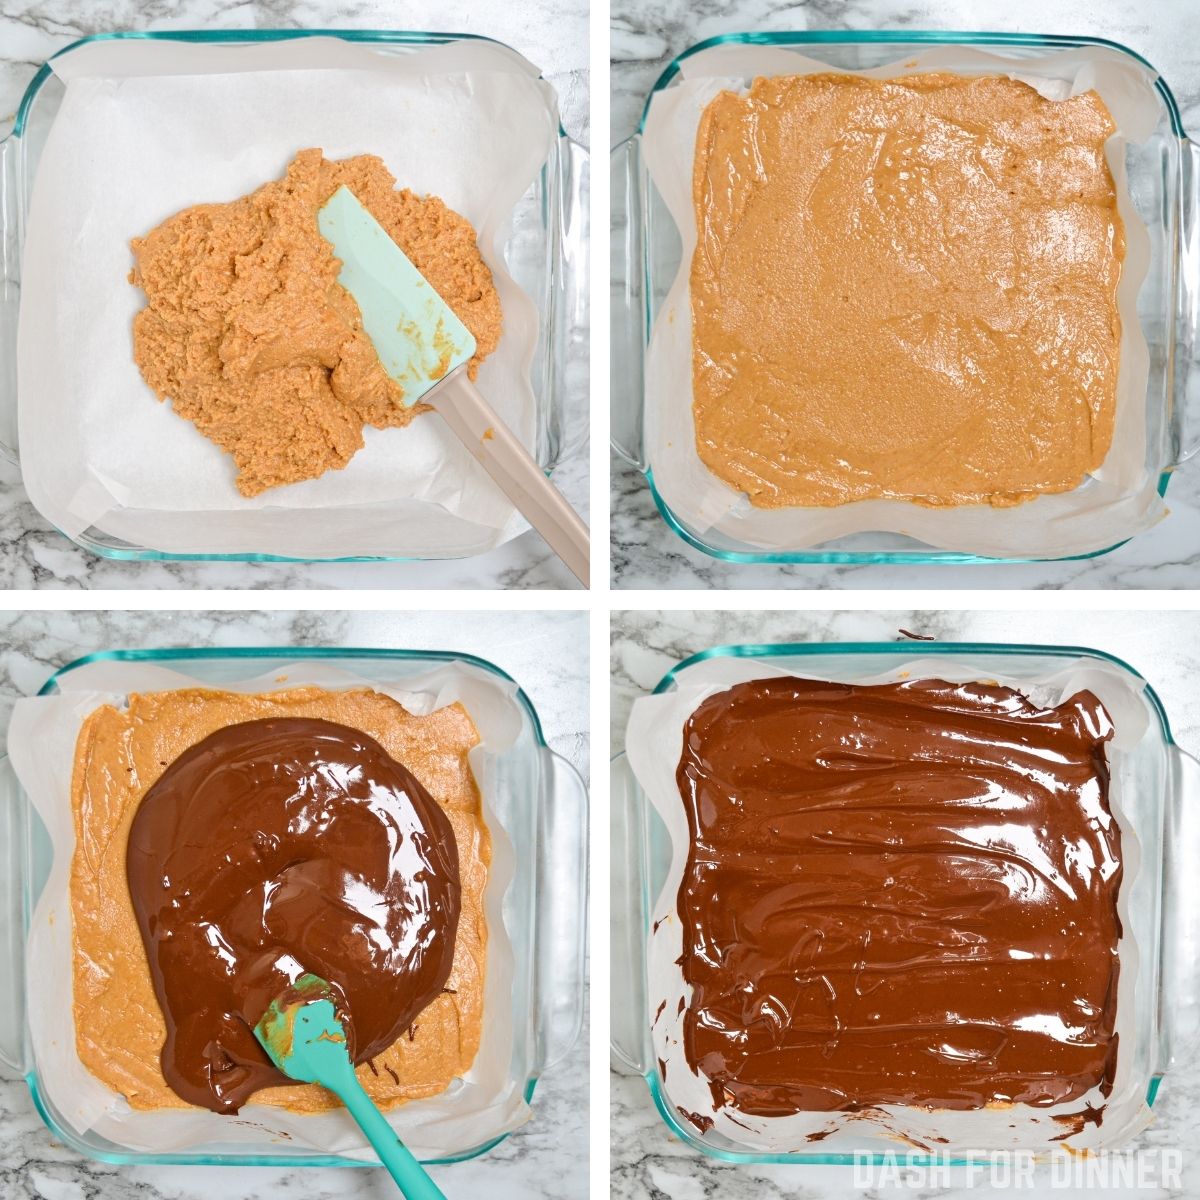 How to make peanut butter bars with a chocolate layer.